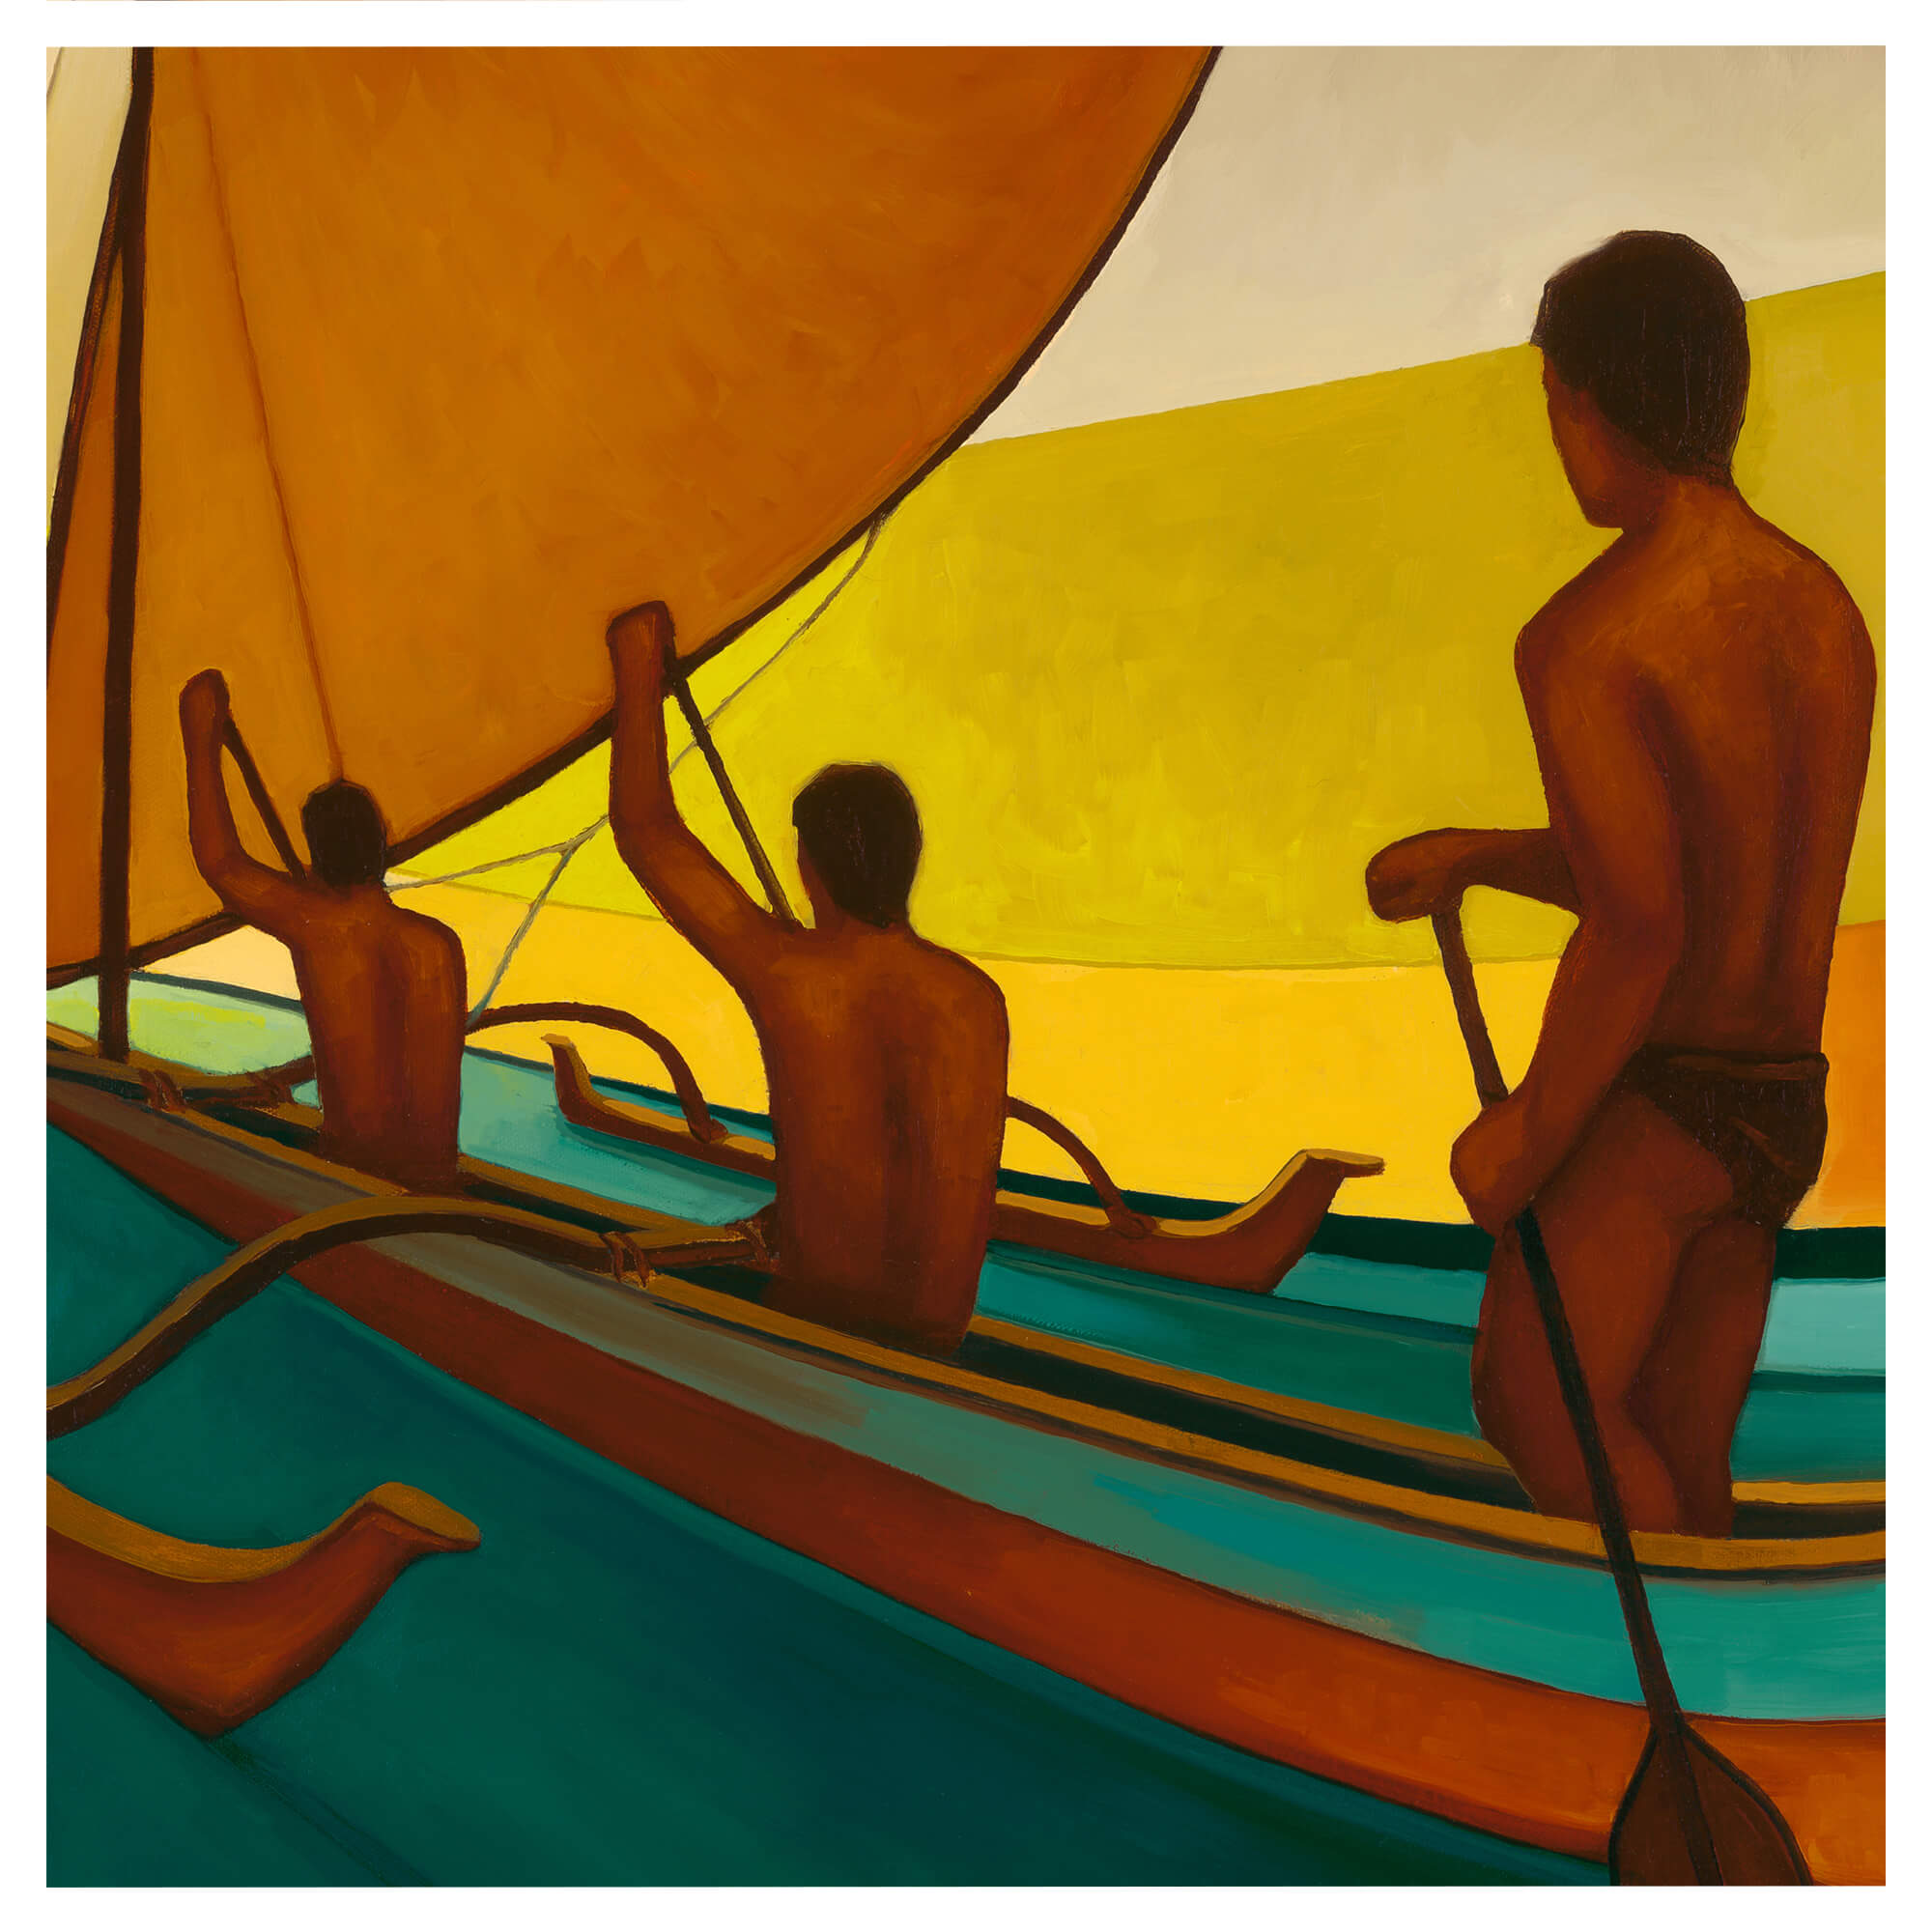 Three men on a journey by Hawaii artist Colin Redican